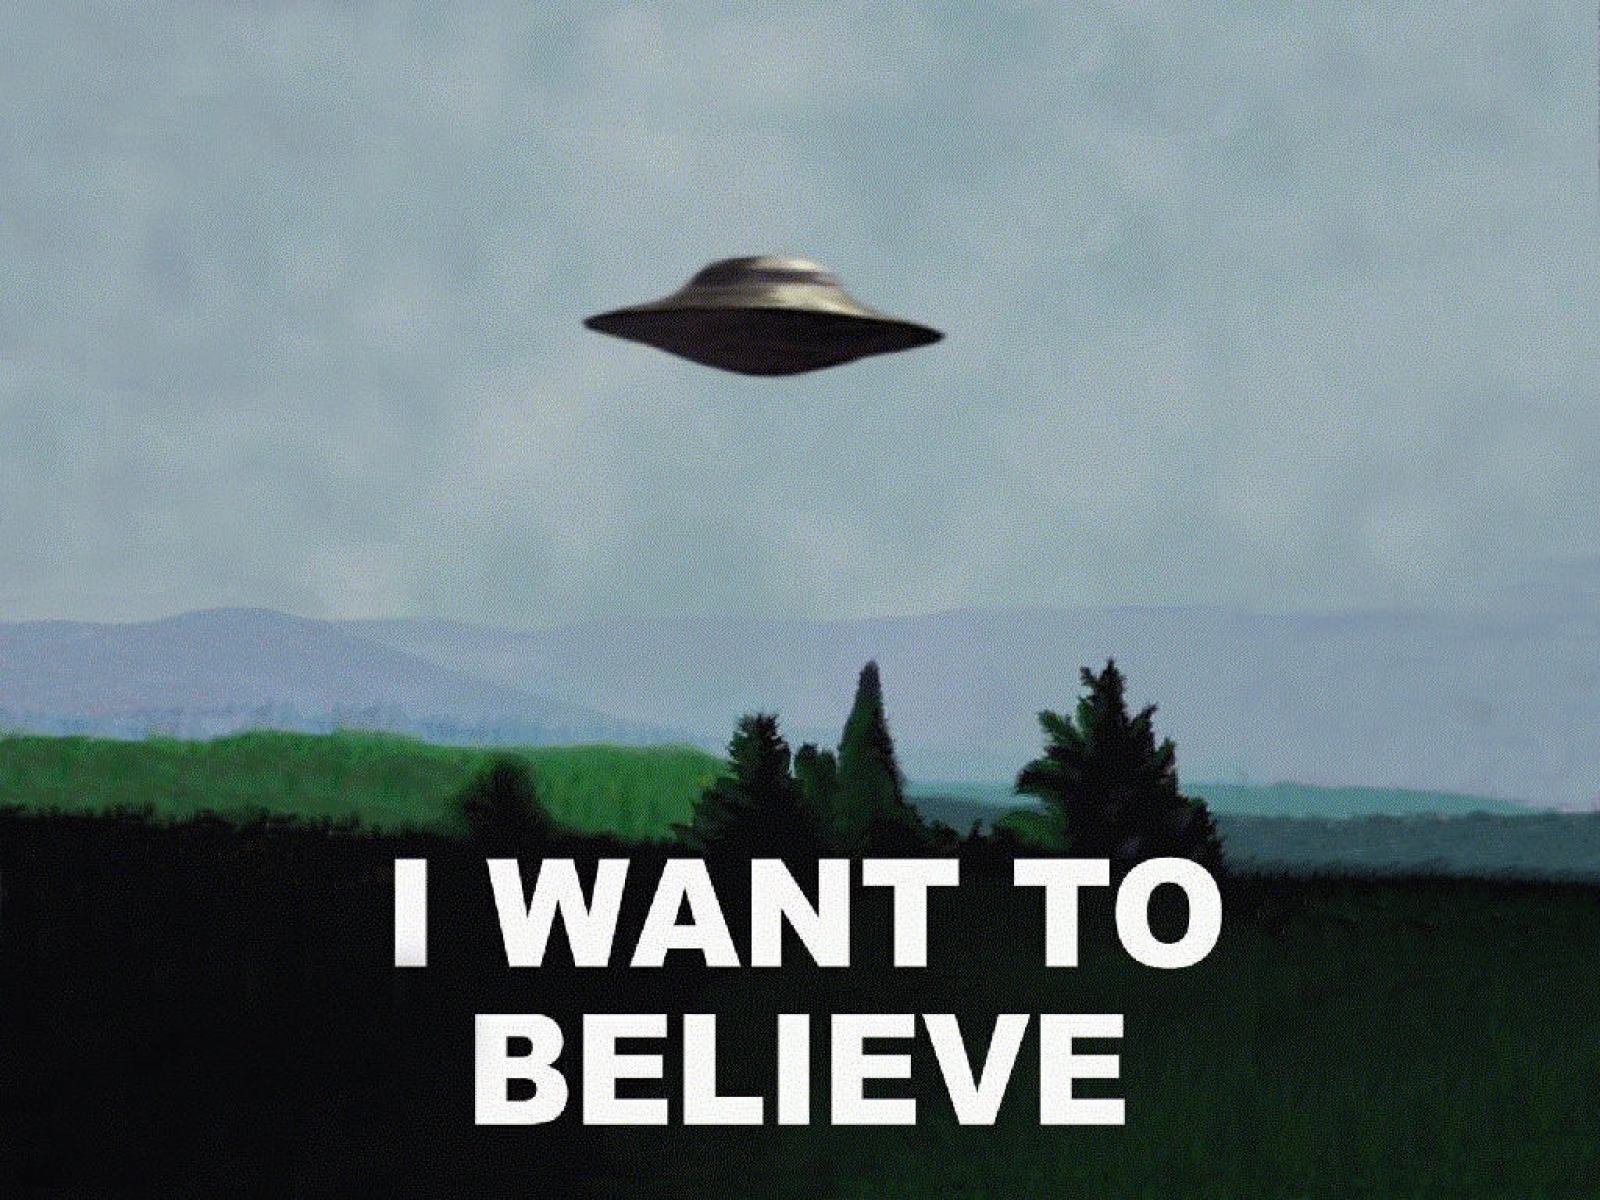 I want a new one. I want to believe. Плакат с НЛО I want to believe. Постер i want to believe. Летающая тарелка i want to believe.